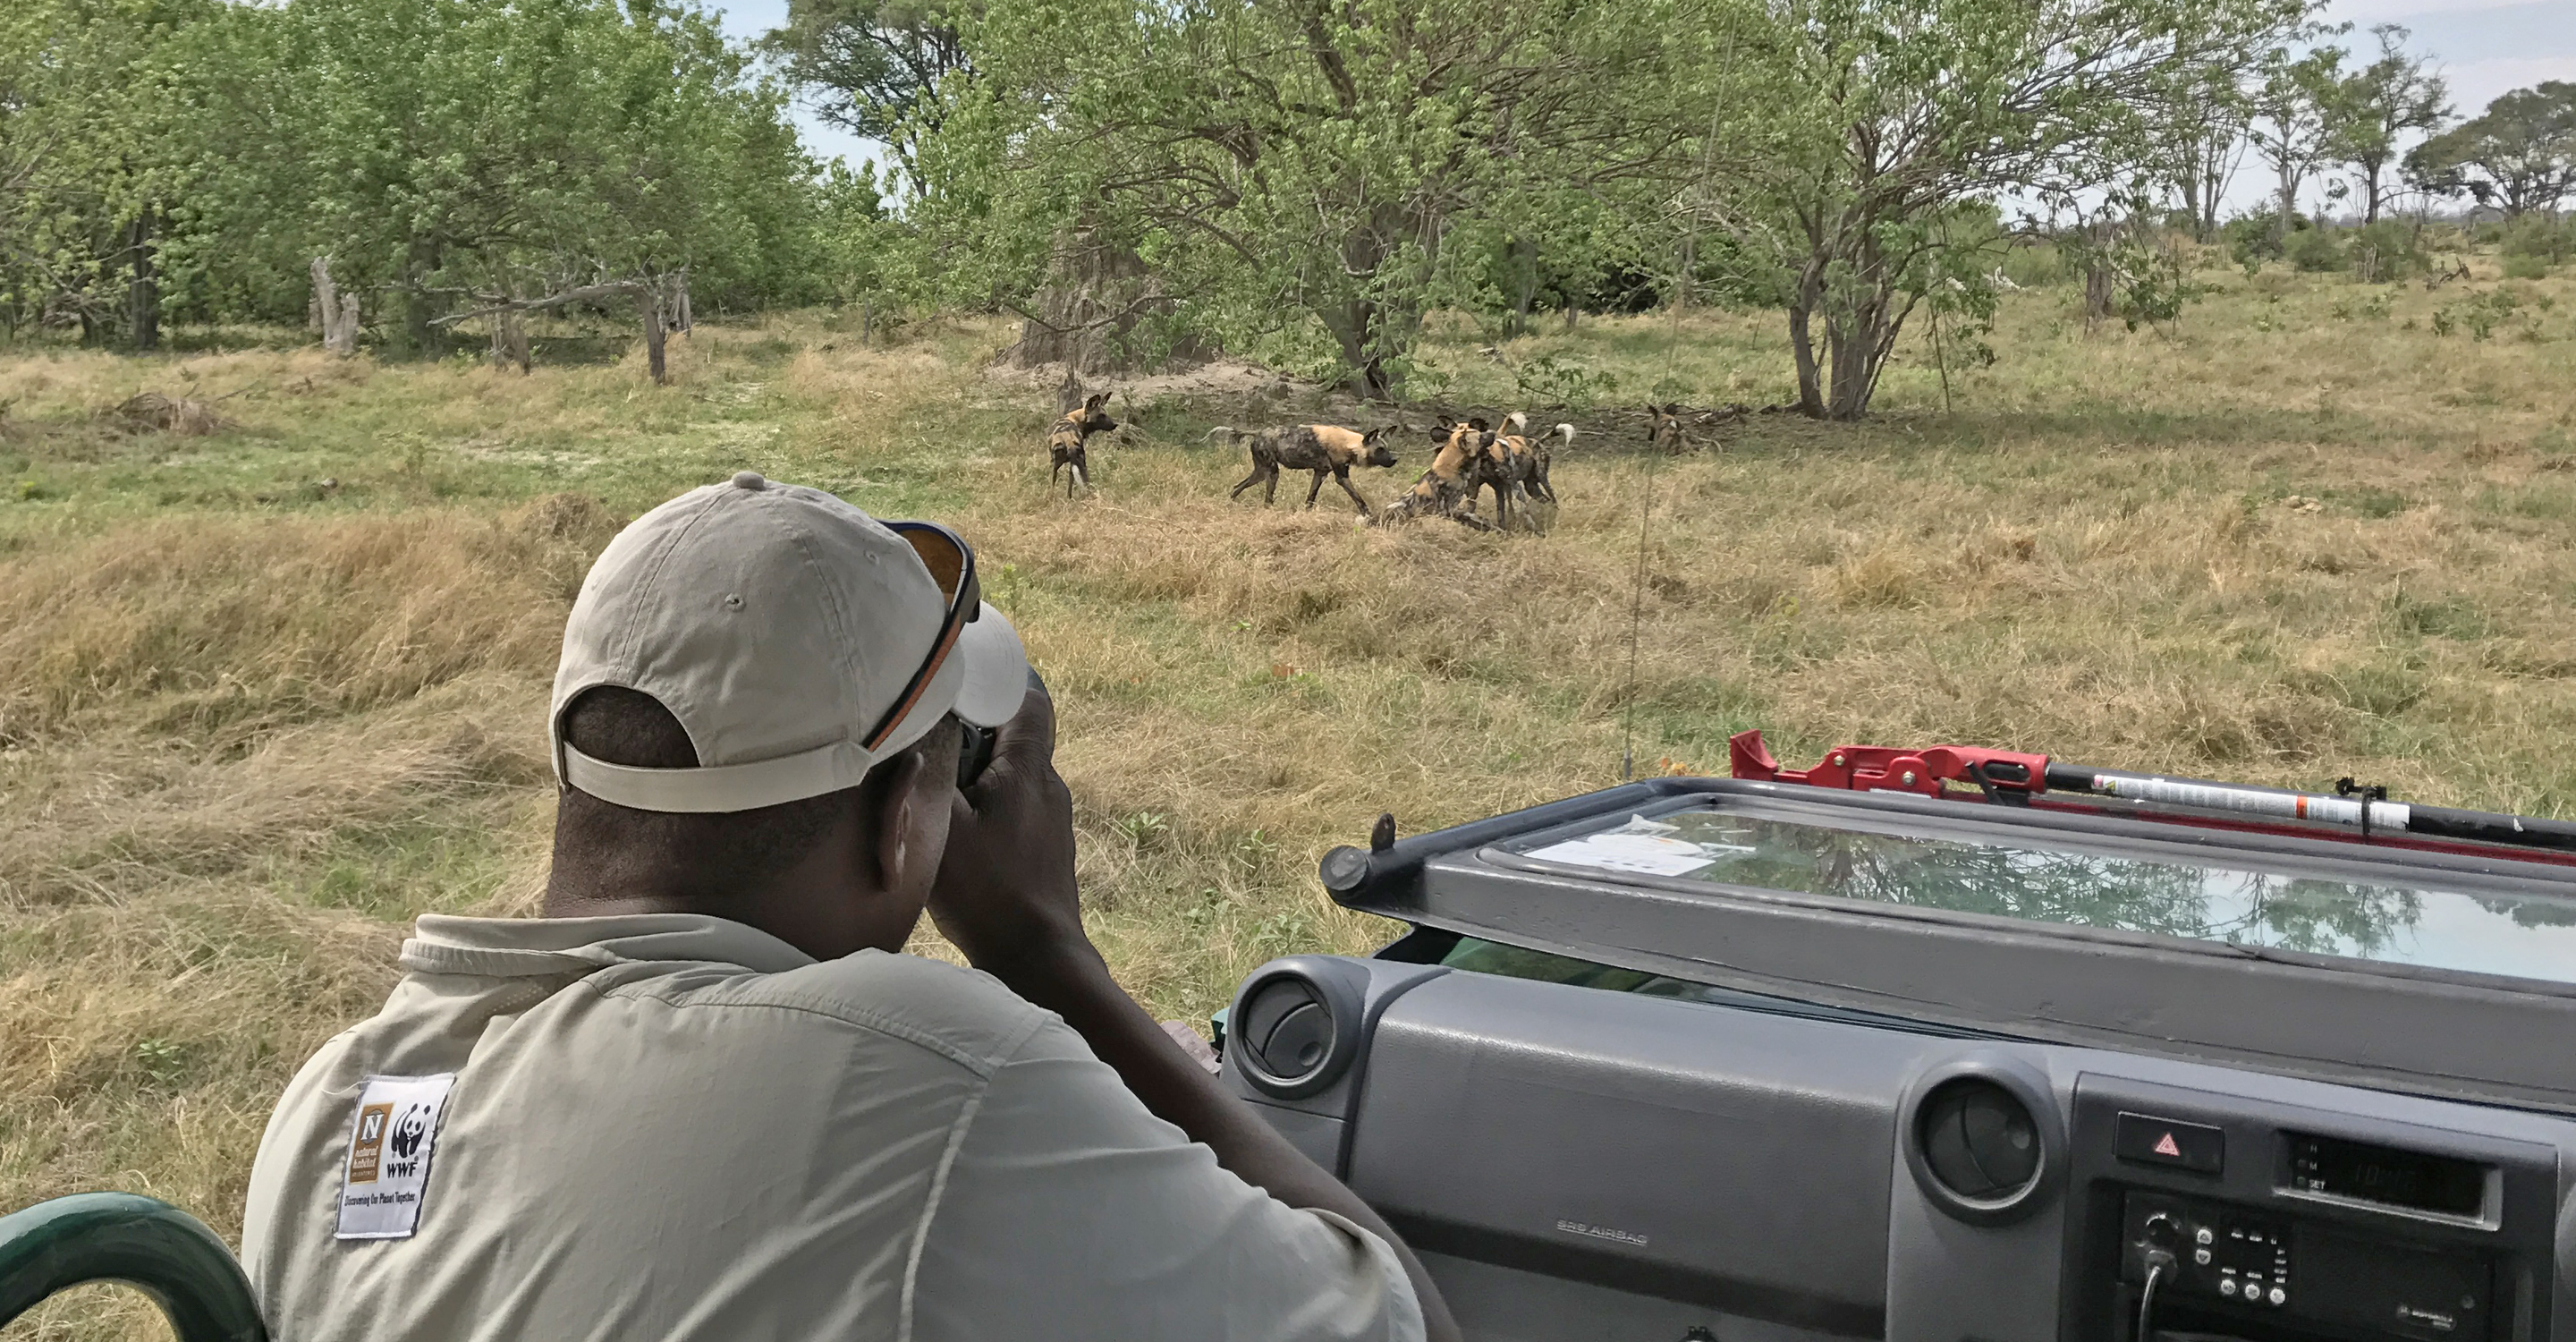 A guide in his safari vehicle photographs a group of African wild dogs eating, Okavango Delta, Botswana